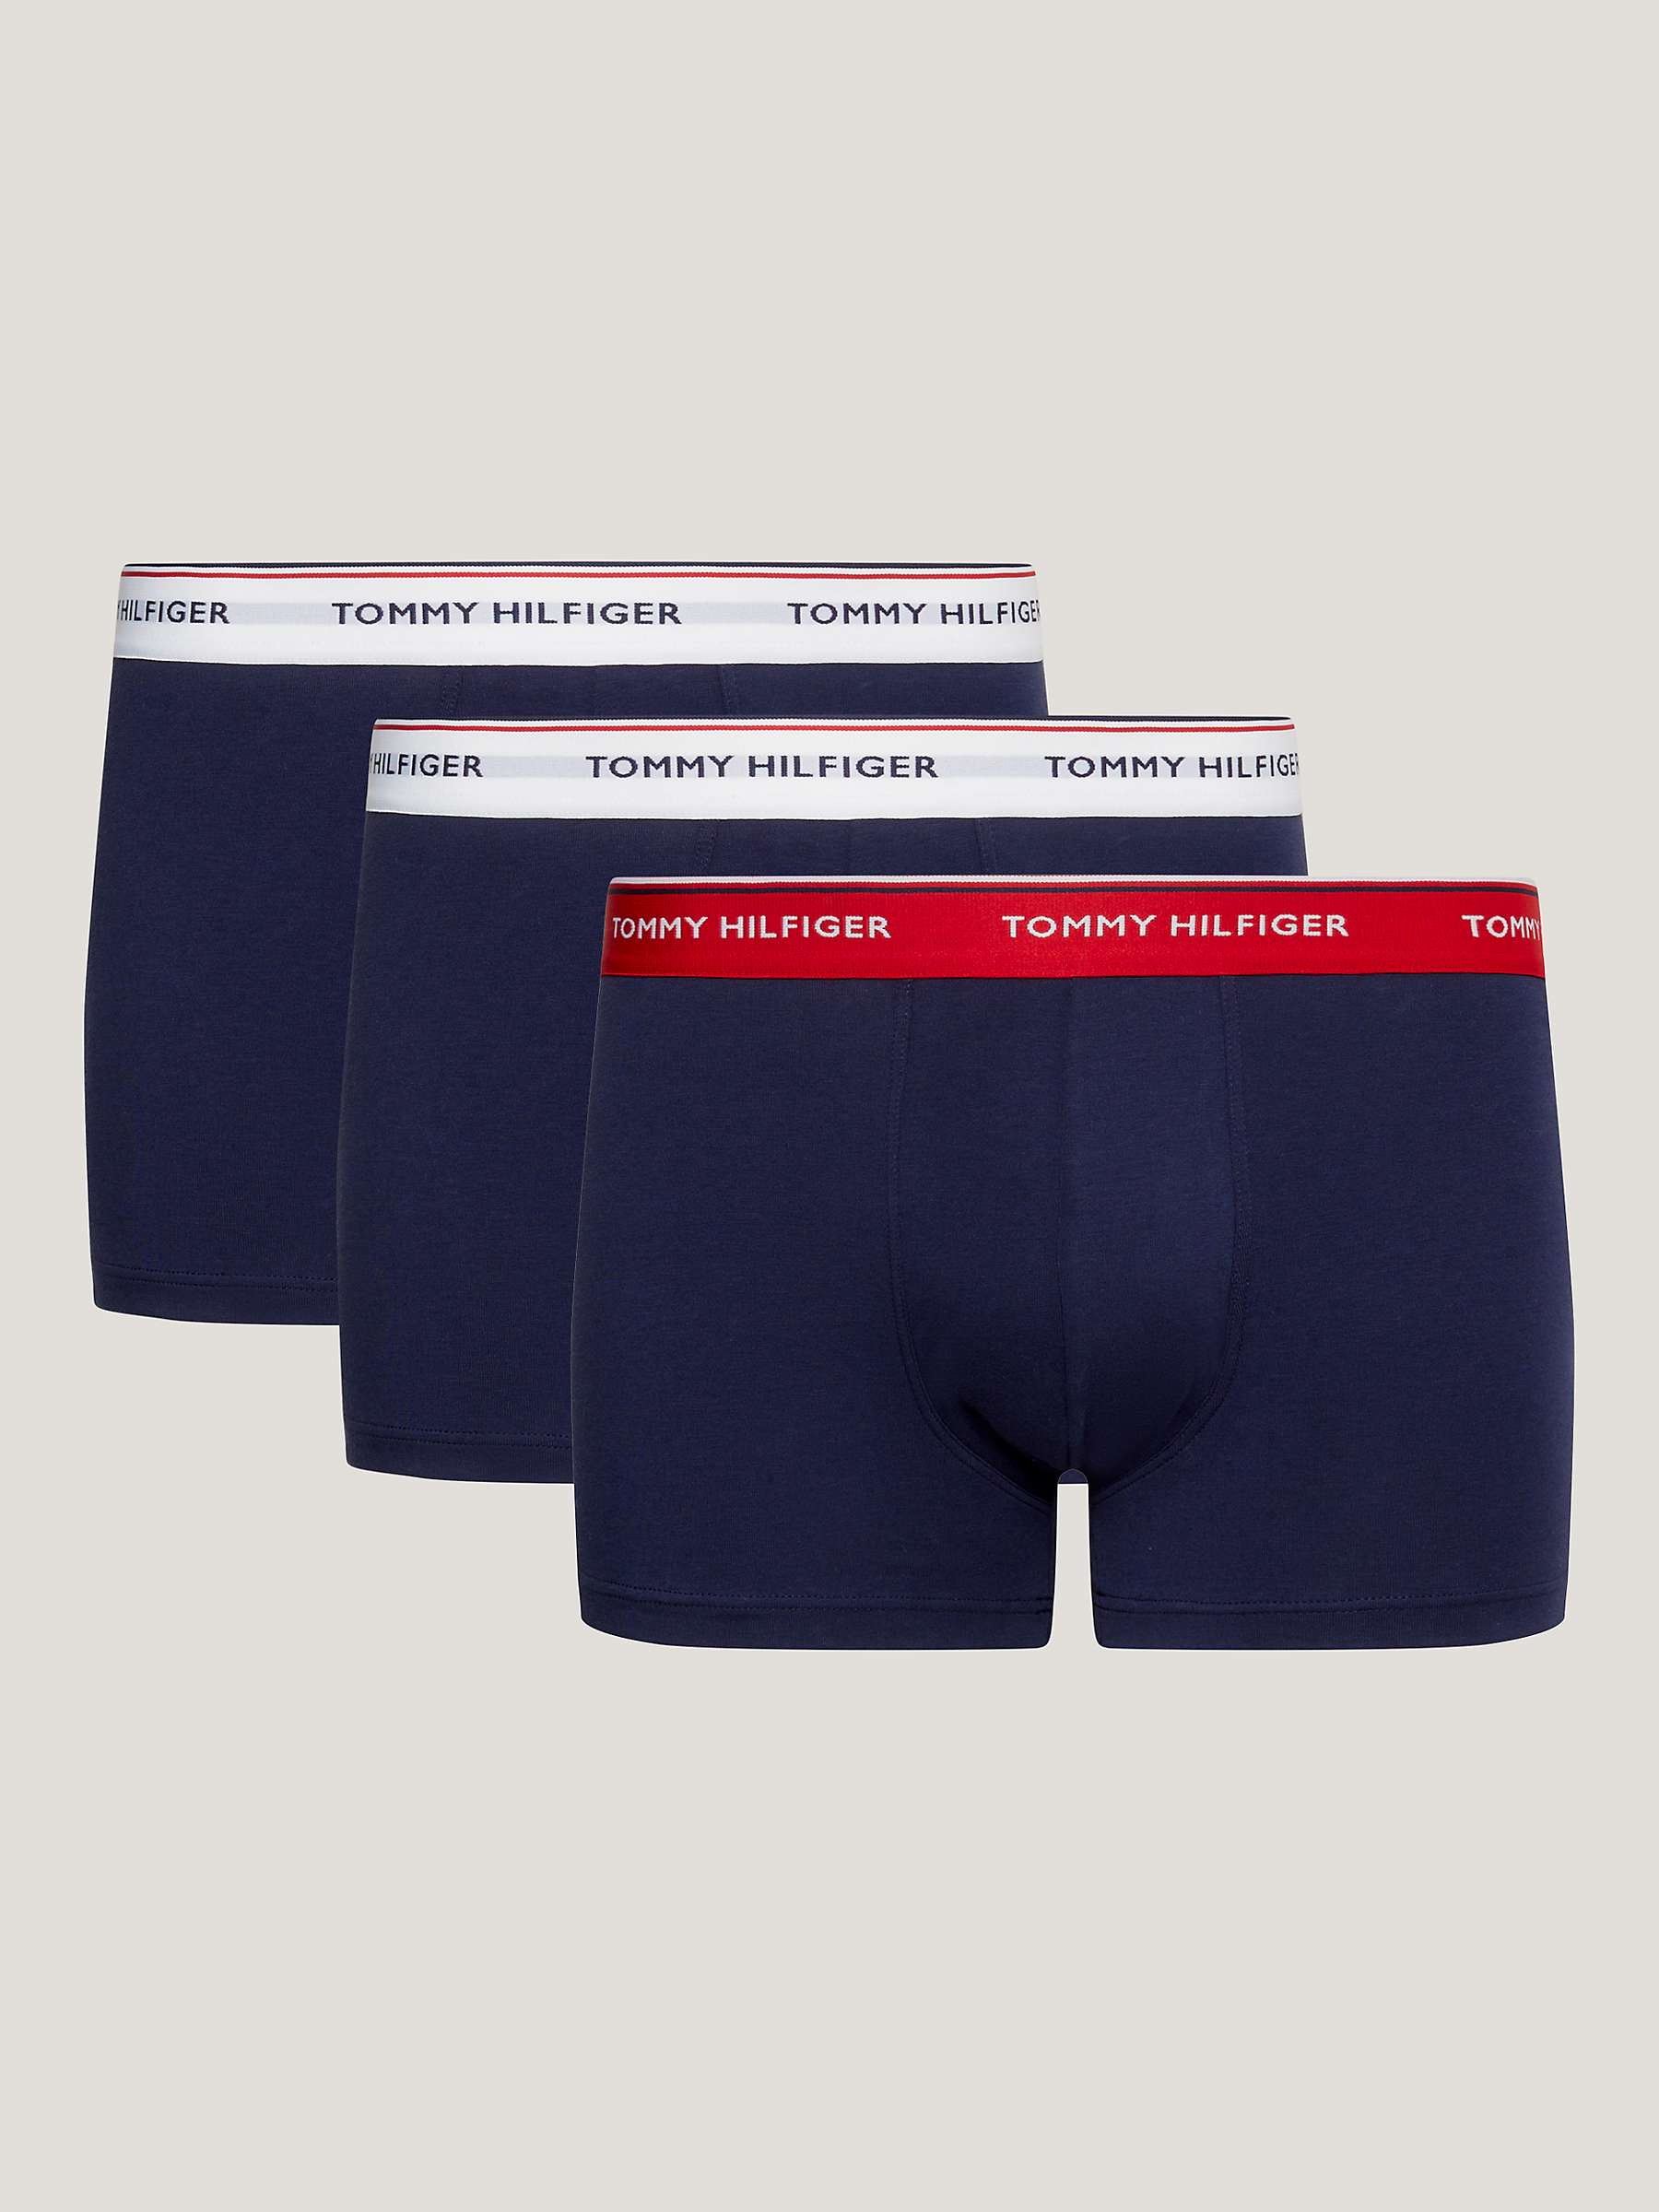 Buy Tommy Hilfiger Cotton Jersey Trunks, Pack of 3, Multi/Peacoat Online at johnlewis.com